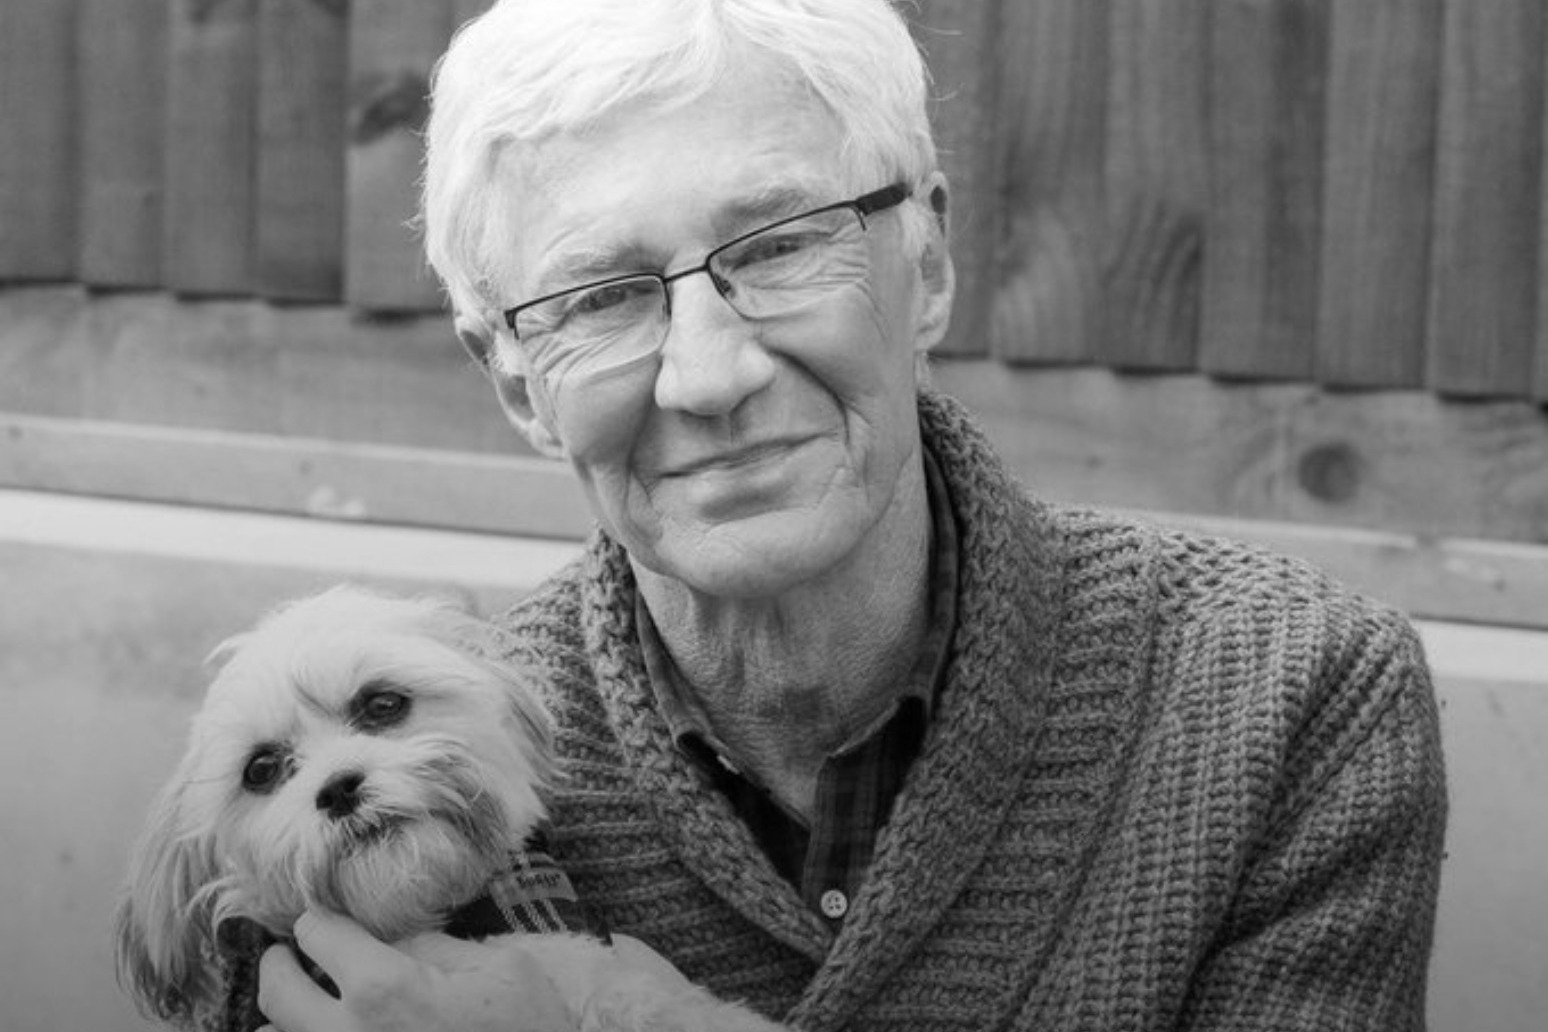 Battersea dogs home names veterinary hospital in honour of late Paul O’Grady 